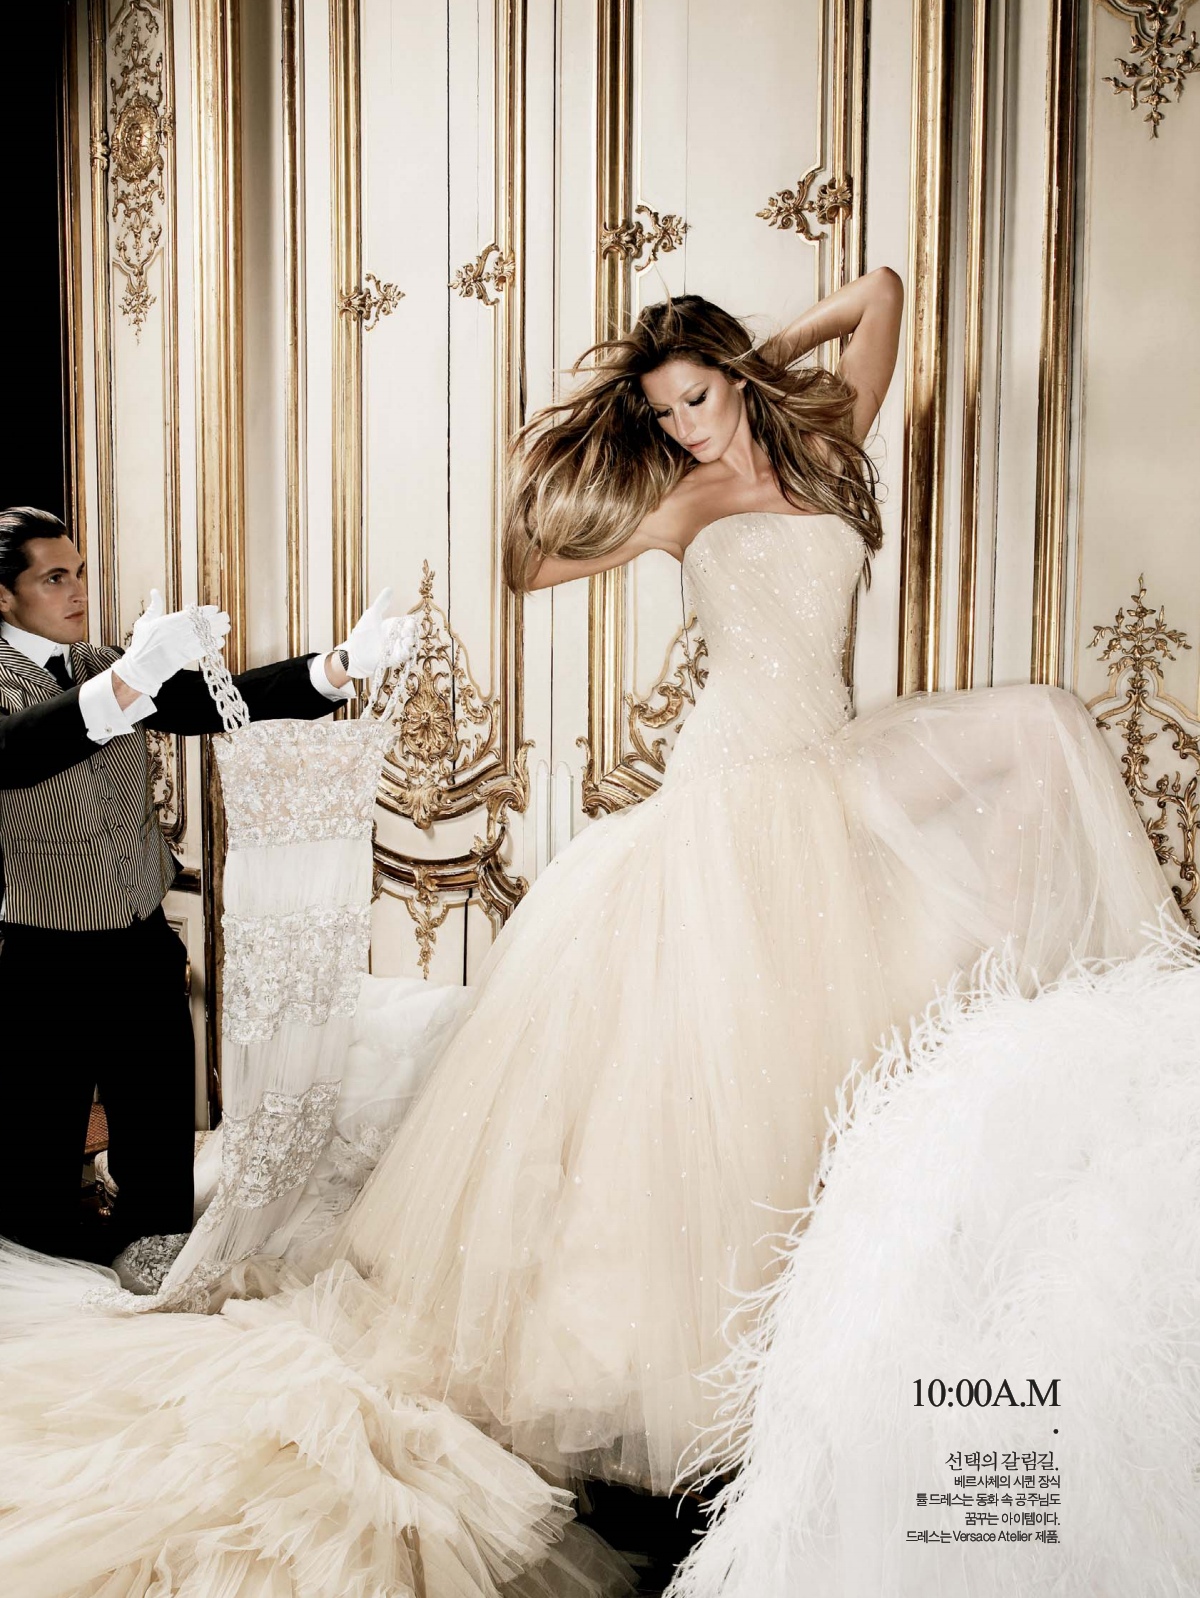 Fashion Redux | Editorial: 24-Hour Couture, Gisele Bündchen by Karl Lagerfeld for Harper’s Bazaar Korea August 2007